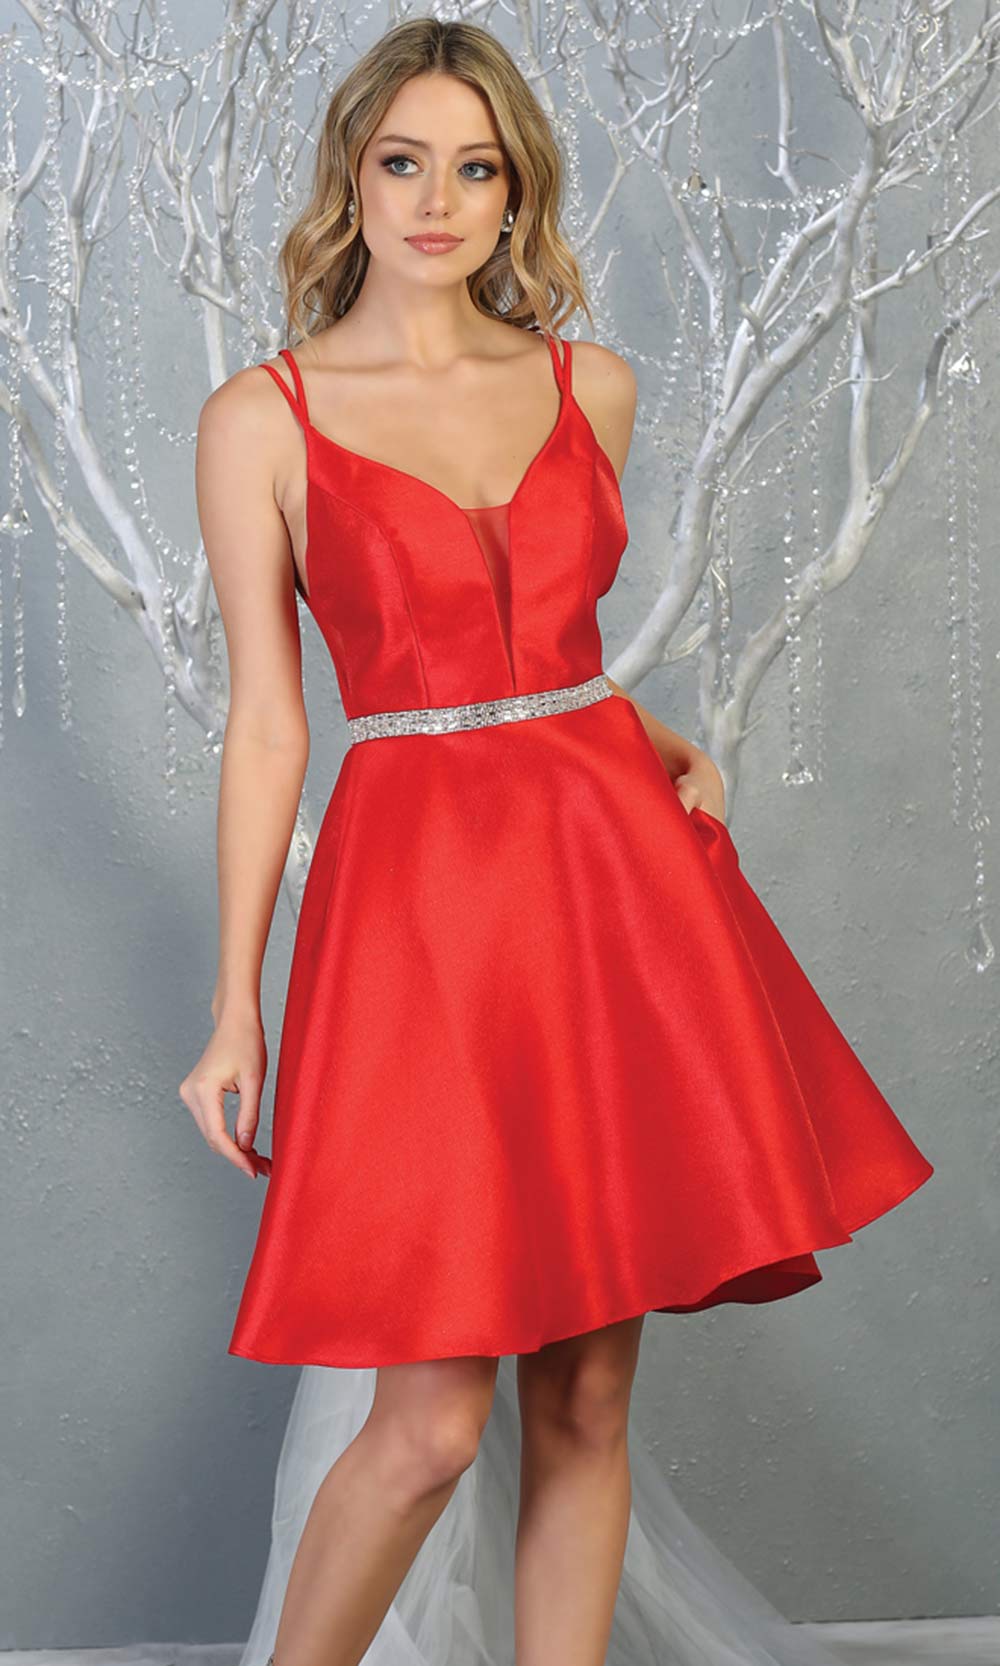 Mayqueen MQ1775 short red satin flowy v neck simple grade 8 graduation dress w/ straps & low back. Red party dress is perfect for prom, graduation, grade 8 grad, confirmation dress, bat mitzvah dress, damas. Plus sizes avail for grad dress.jpg